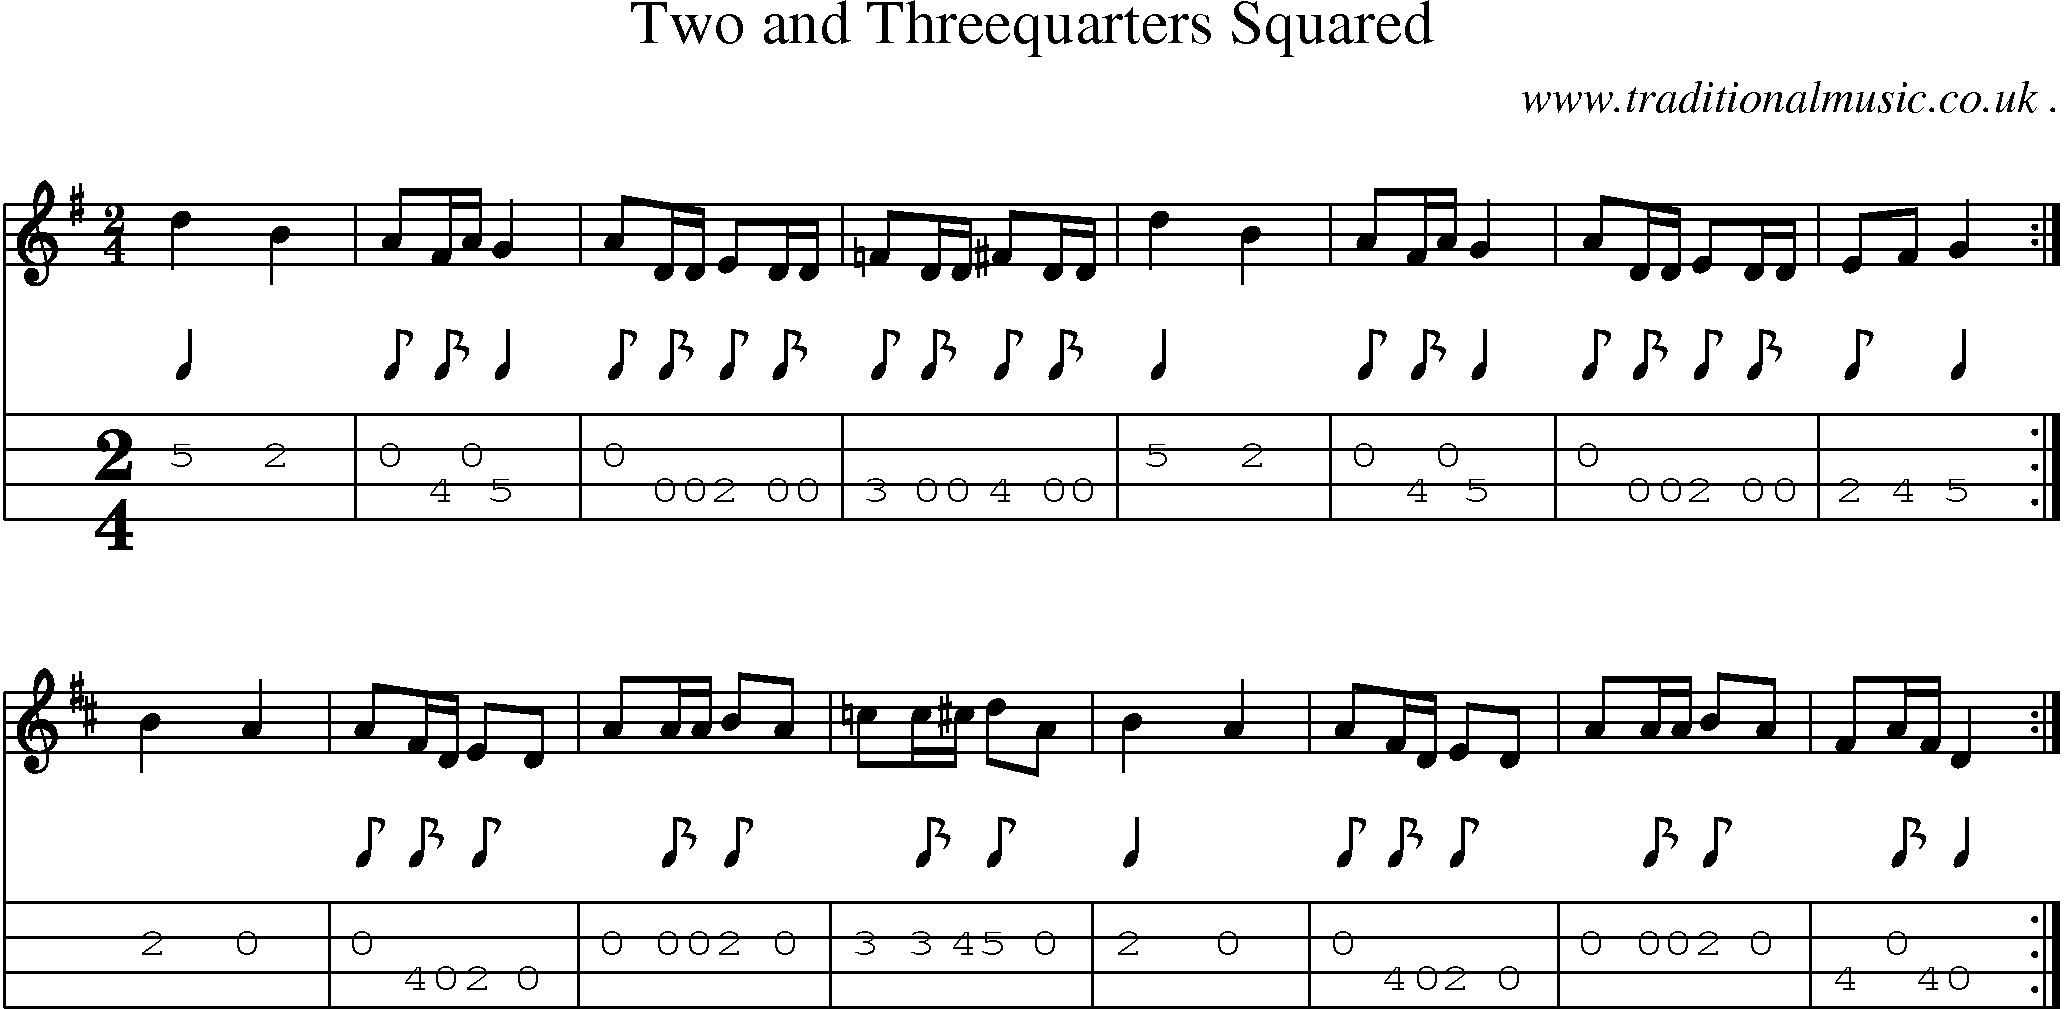 Sheet-Music and Mandolin Tabs for Two And Threequarters Squared